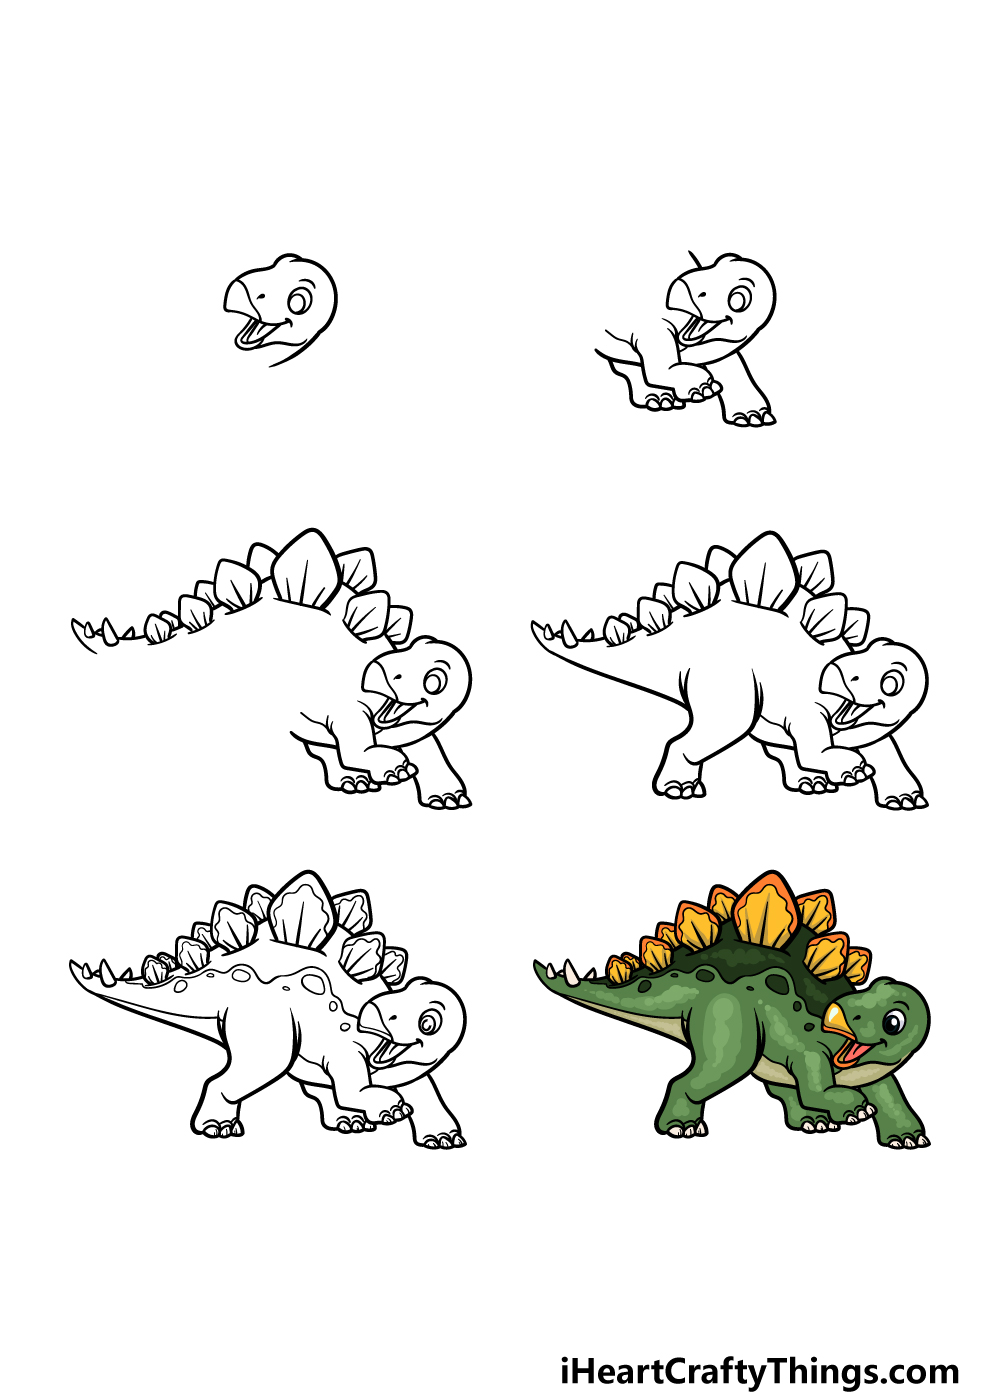 how to draw a Stegosaurus in 6 steps